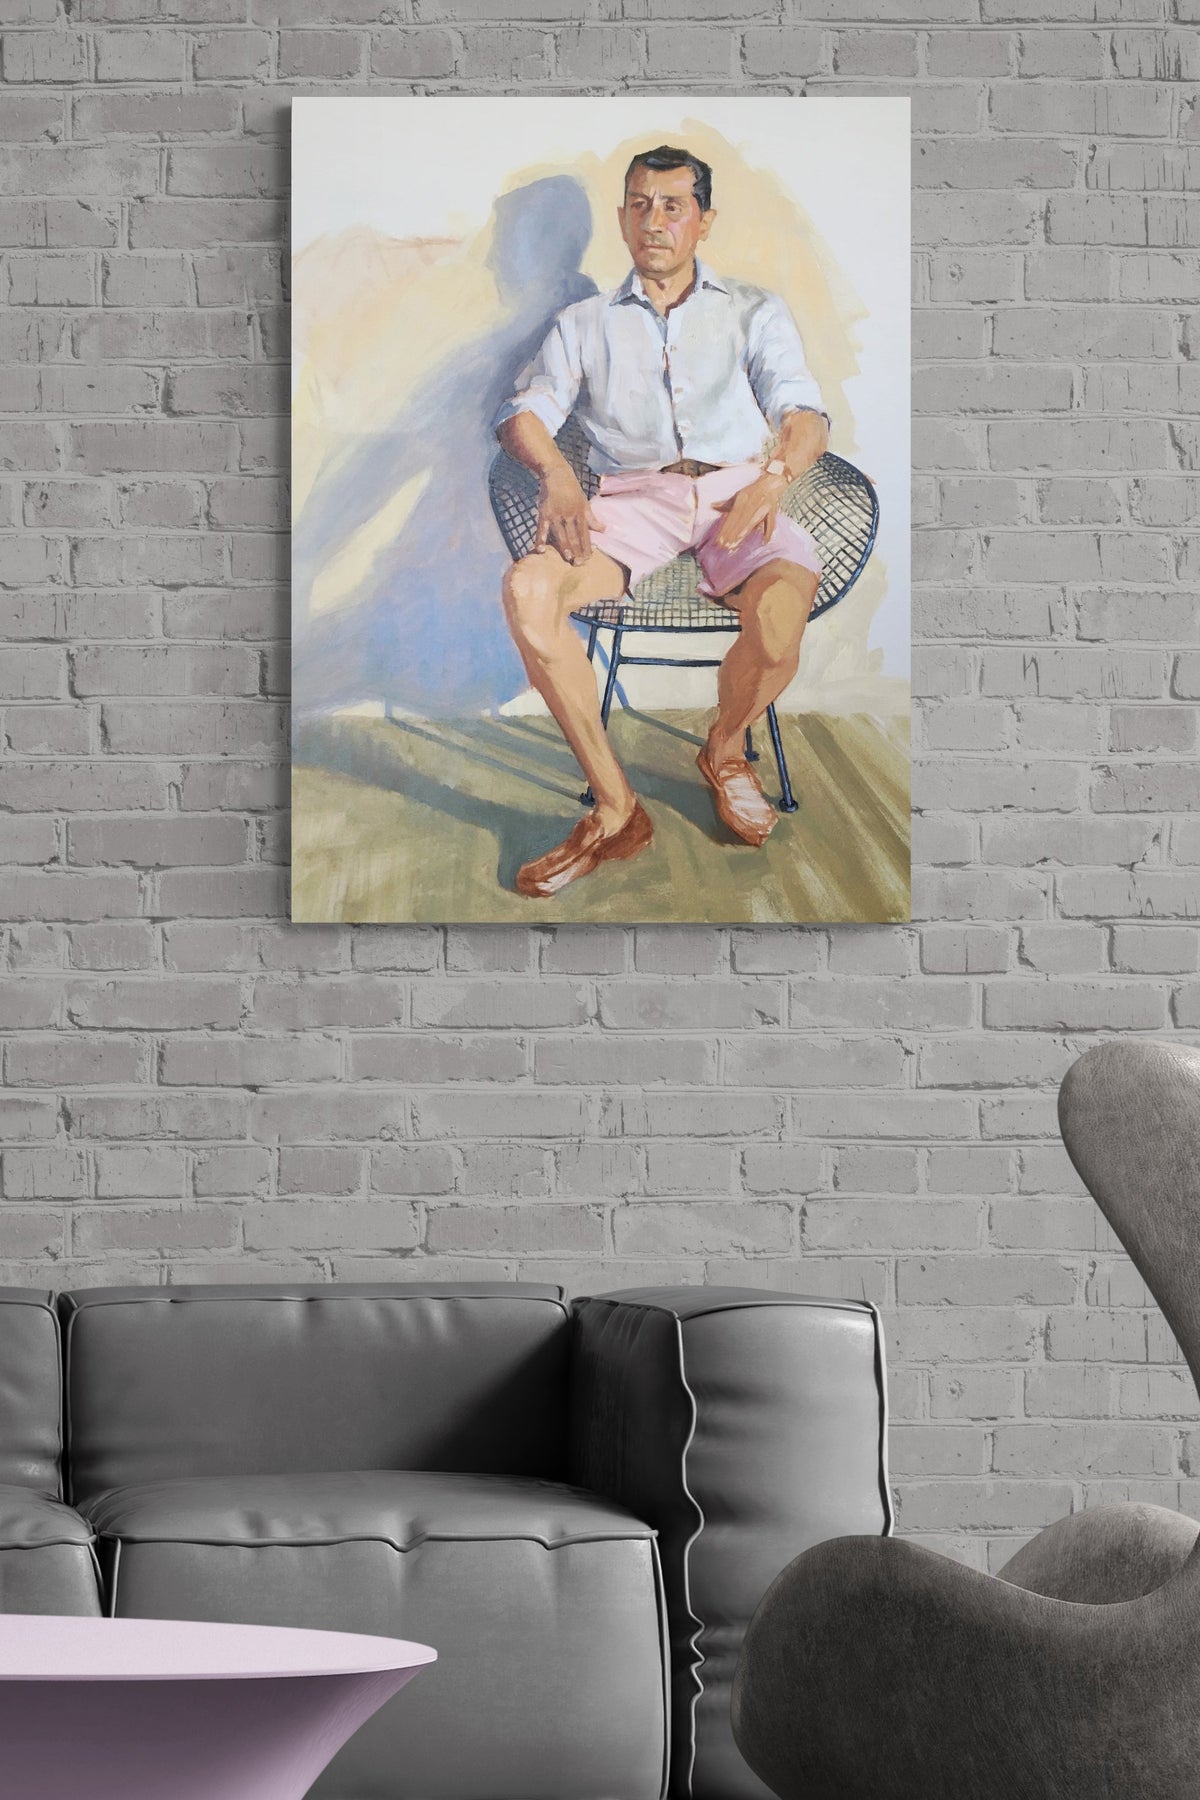 Male figurative painting brings conversation to this contemporary living room